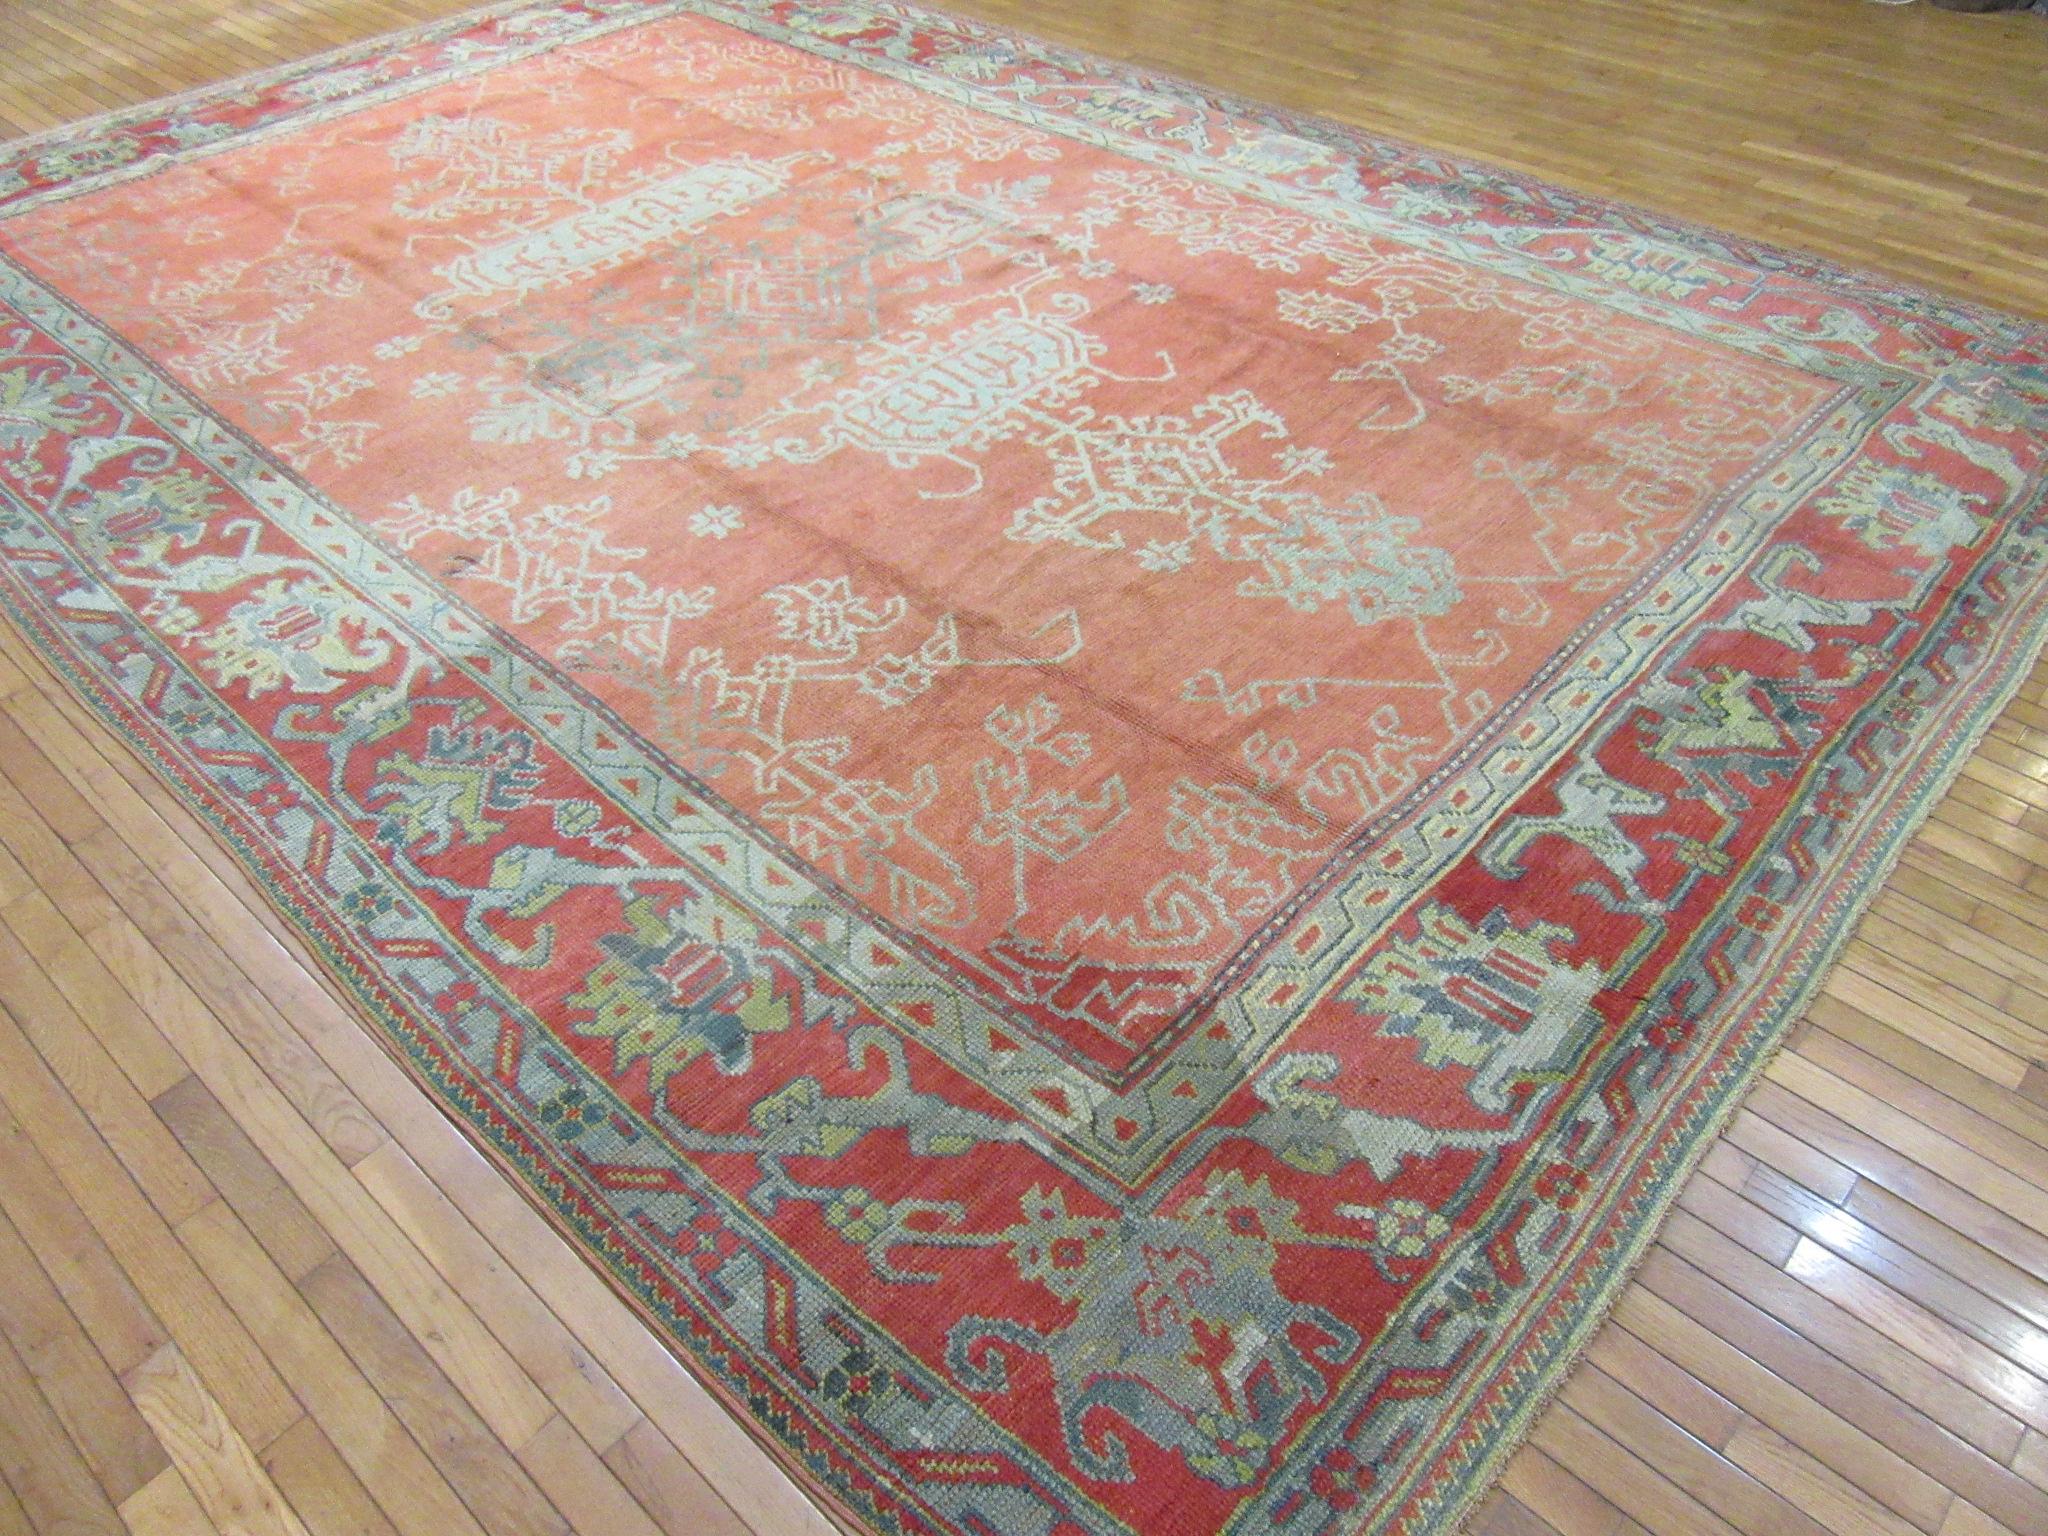 Large Antique Hand-Knotted Wool Coral Red Green Turkish Oushak Rug For Sale 11